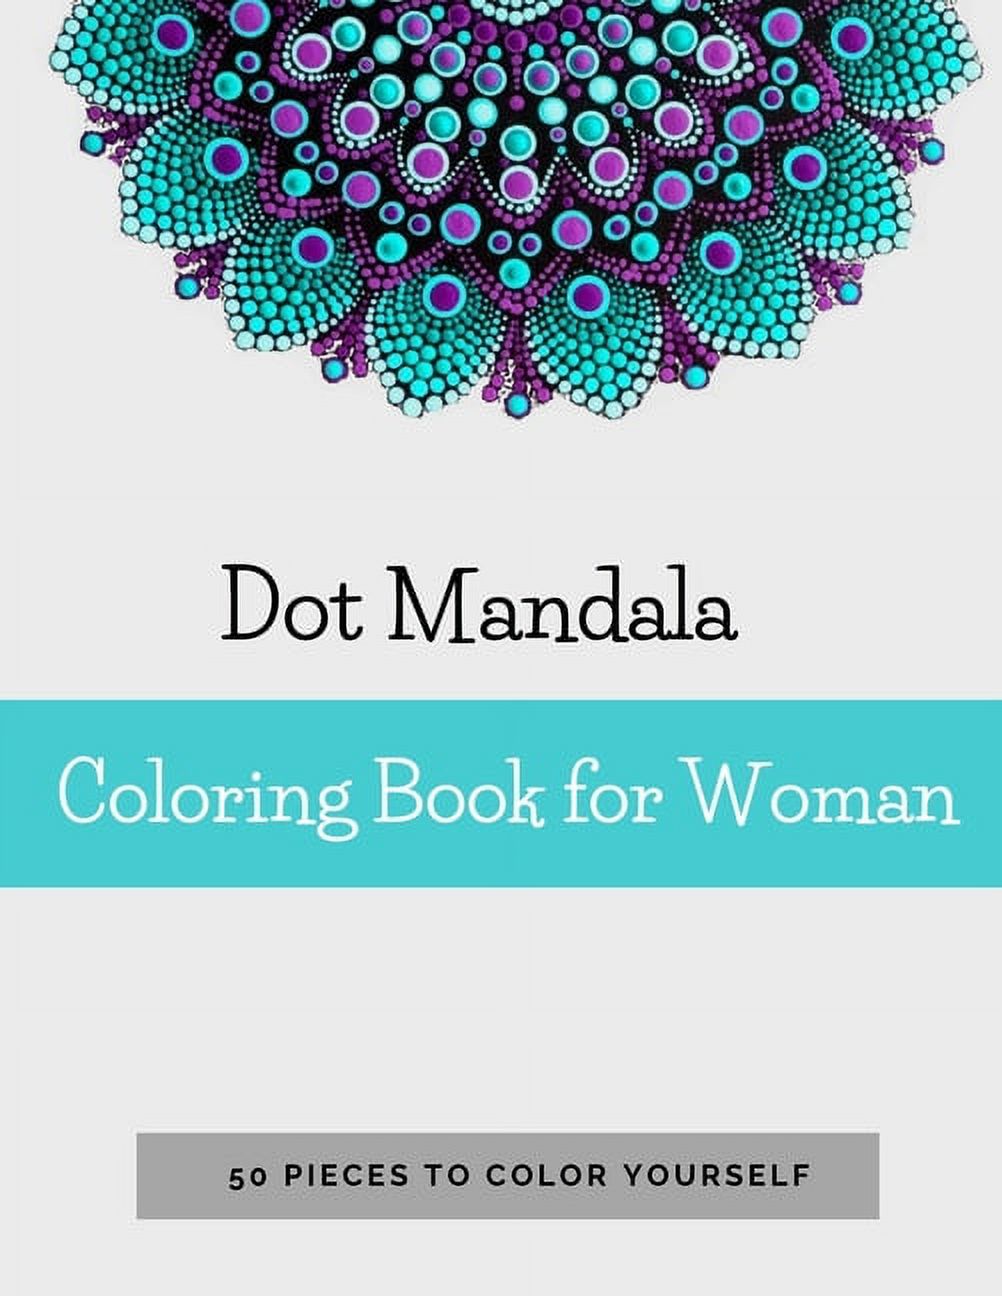 Dot Mandala Coloring Book for Women: 50 Pieces to Color Yourself - Point Painting - Mandala Coloring Book for Adults with Dots [Book]